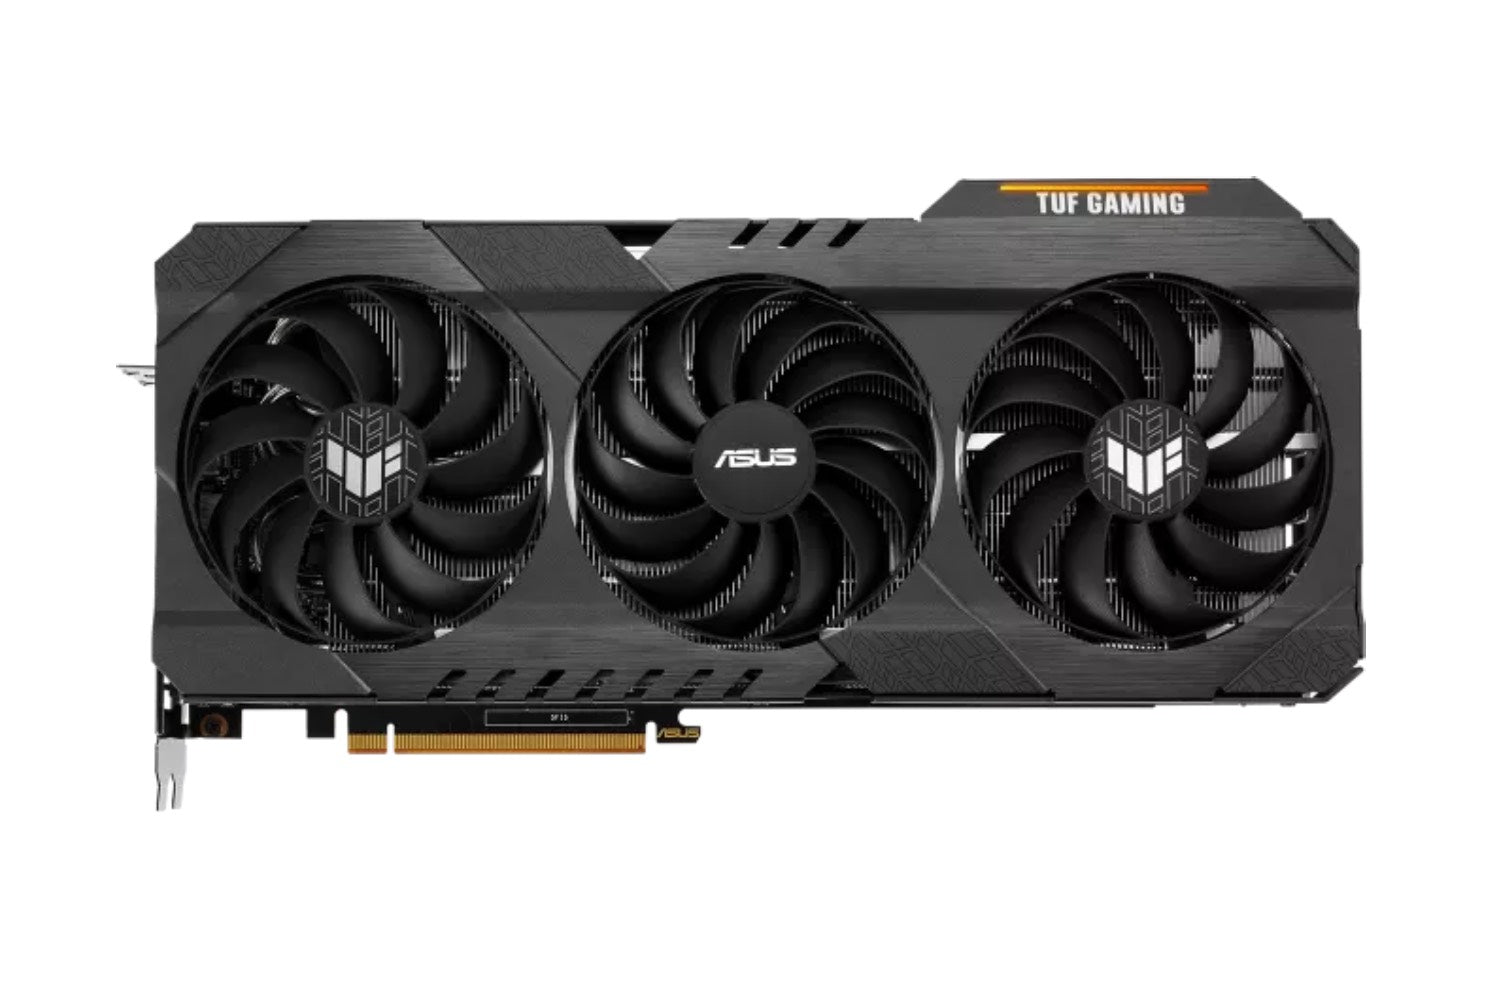 ASUS TUF GAMING Radeon RX 6900 XT 16GB GDDR6 Graphics Card-GRAPHICS CARD-ASUS-computerspace